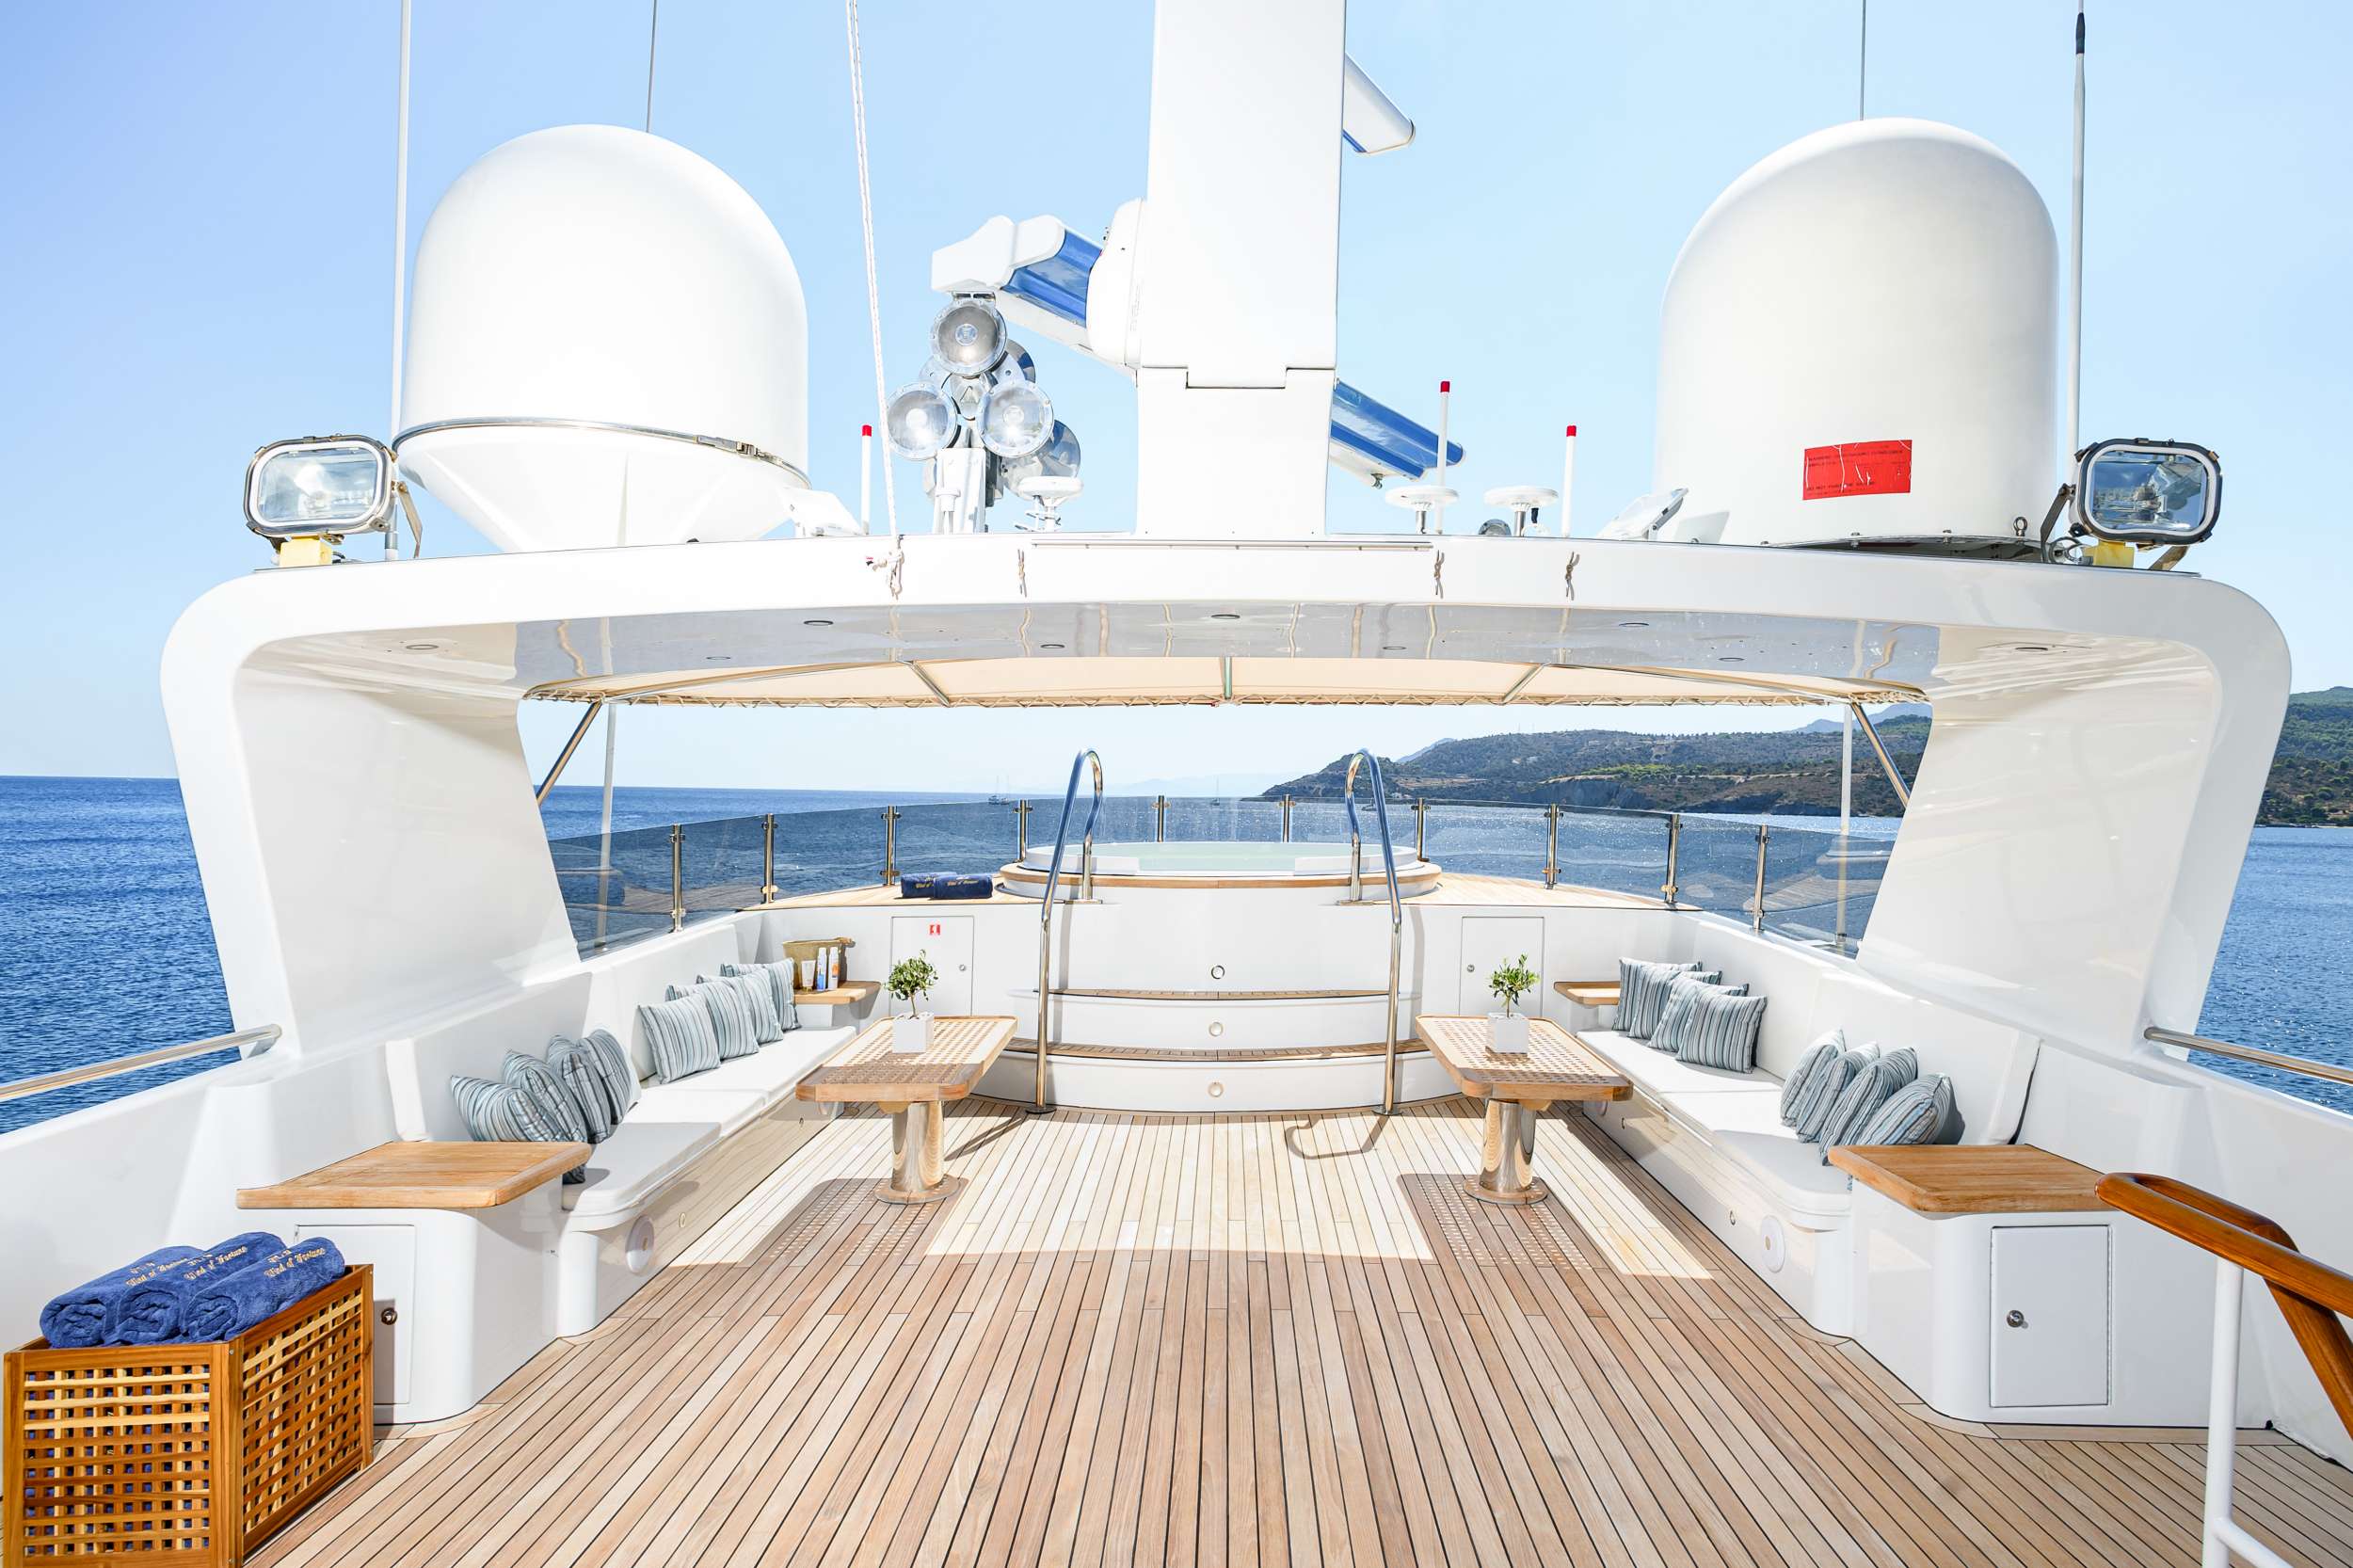 WIND OF FORTUNE - Yacht Charter Marina di Pisticci & Boat hire in Summer: W. Med -Naples/Sicily, Greece, W. Med -Riviera/Cors/Sard., Turkey, W. Med - Spain/Balearics, Croatia | Winter: Indian Ocean and SE Asia, Red Sea, United Arab Emirates 5